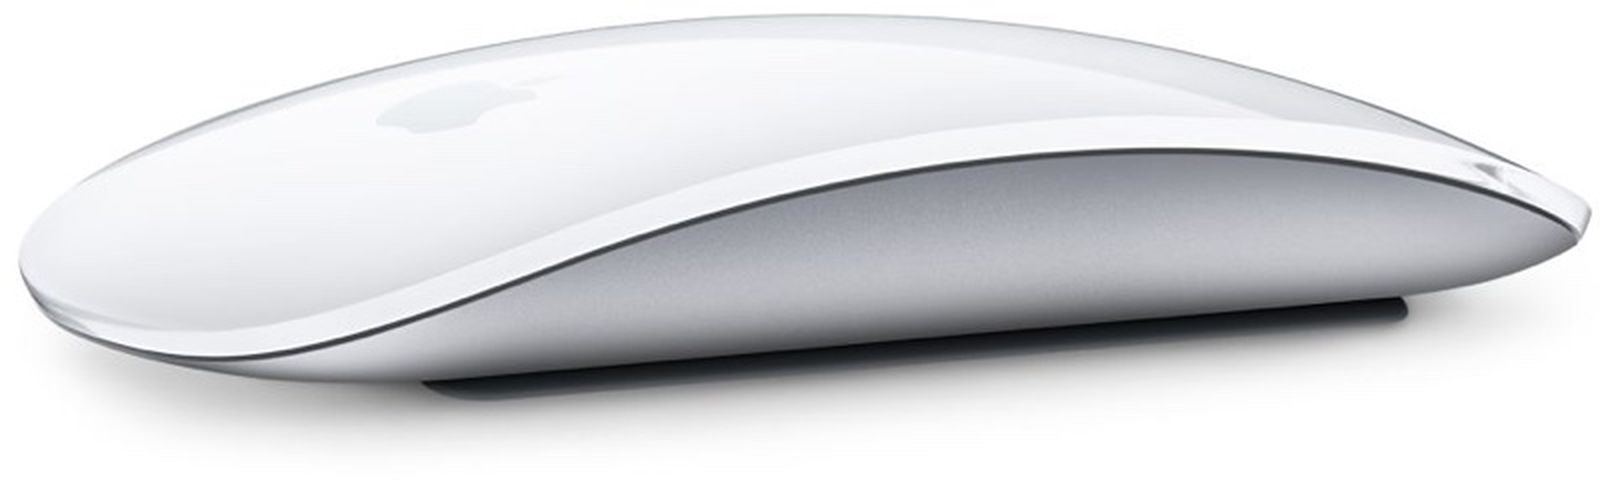 how to use apple mouse with pc